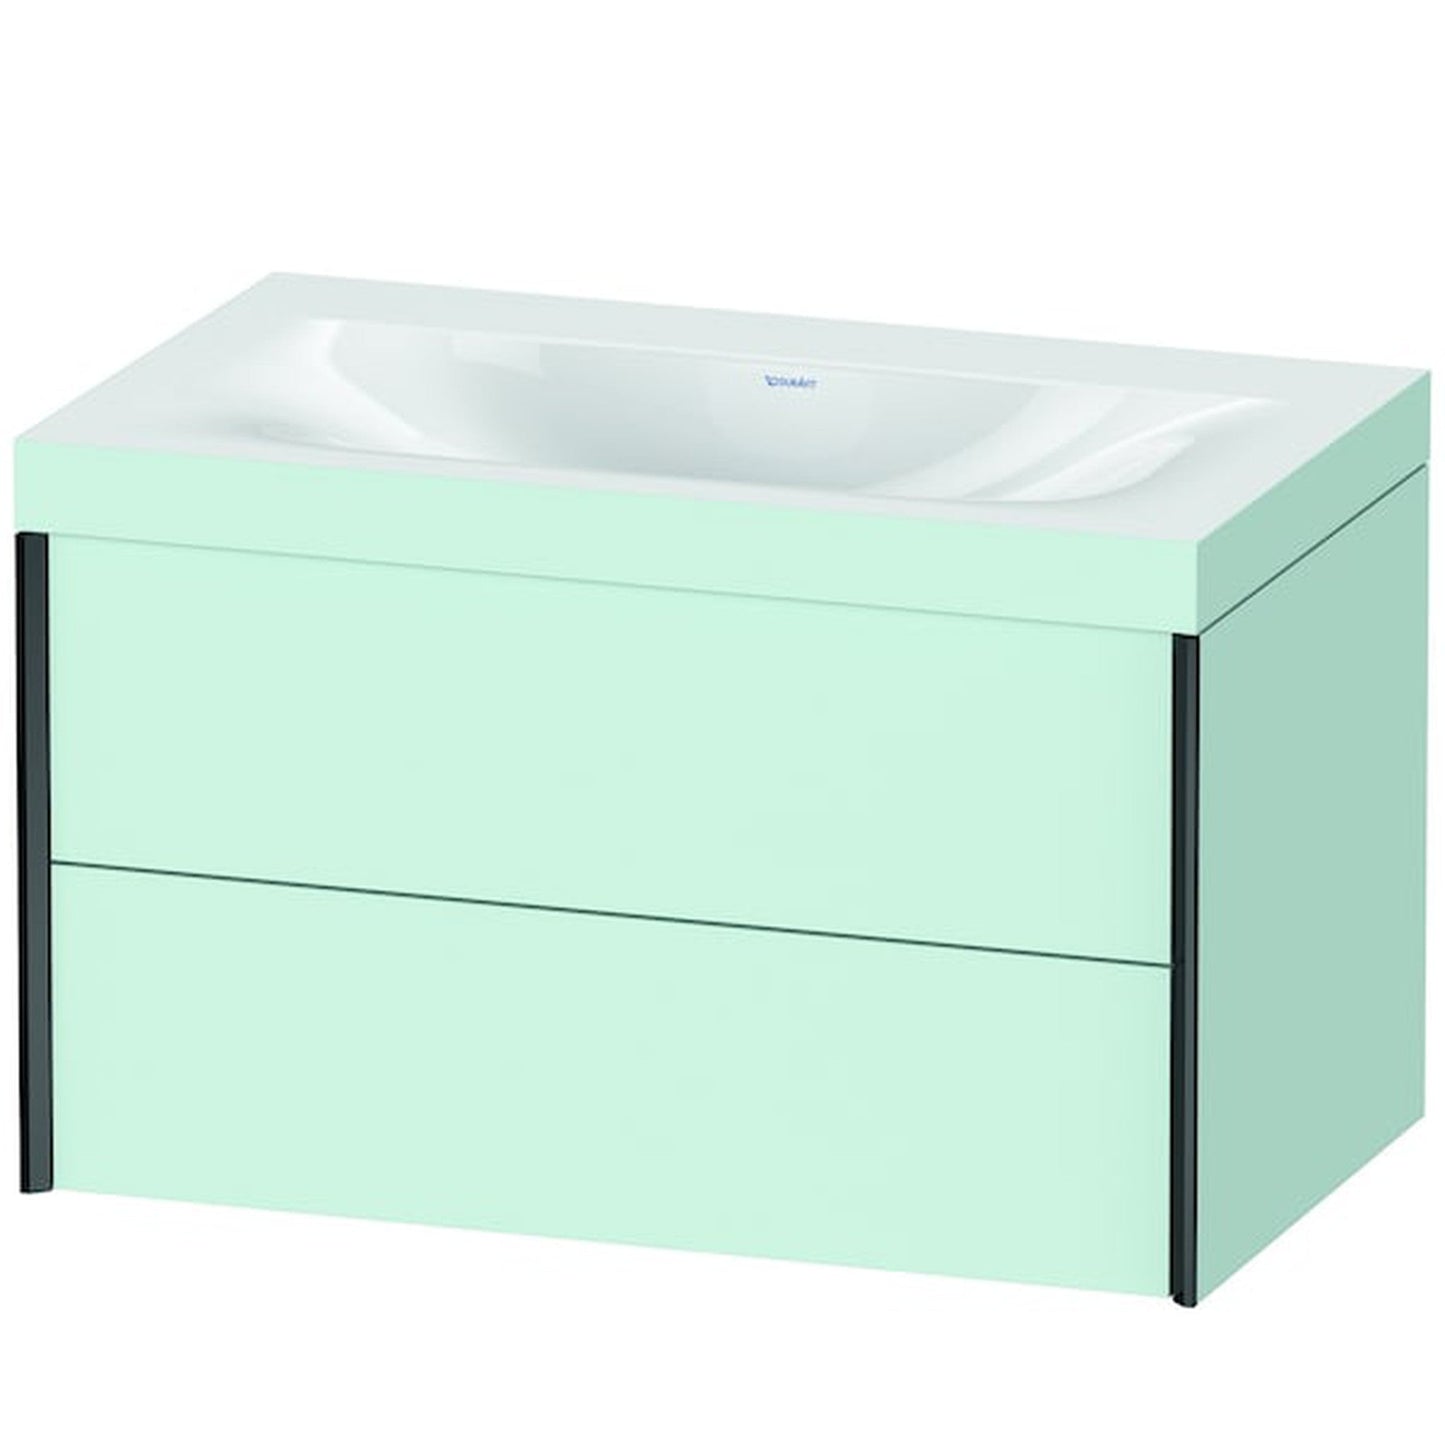 Duravit Xviu 31" x 20" x 19" Two Drawer C-Bonded Wall-Mount Vanity Kit Without Tap Hole, Light Blue (XV4615NB209C)